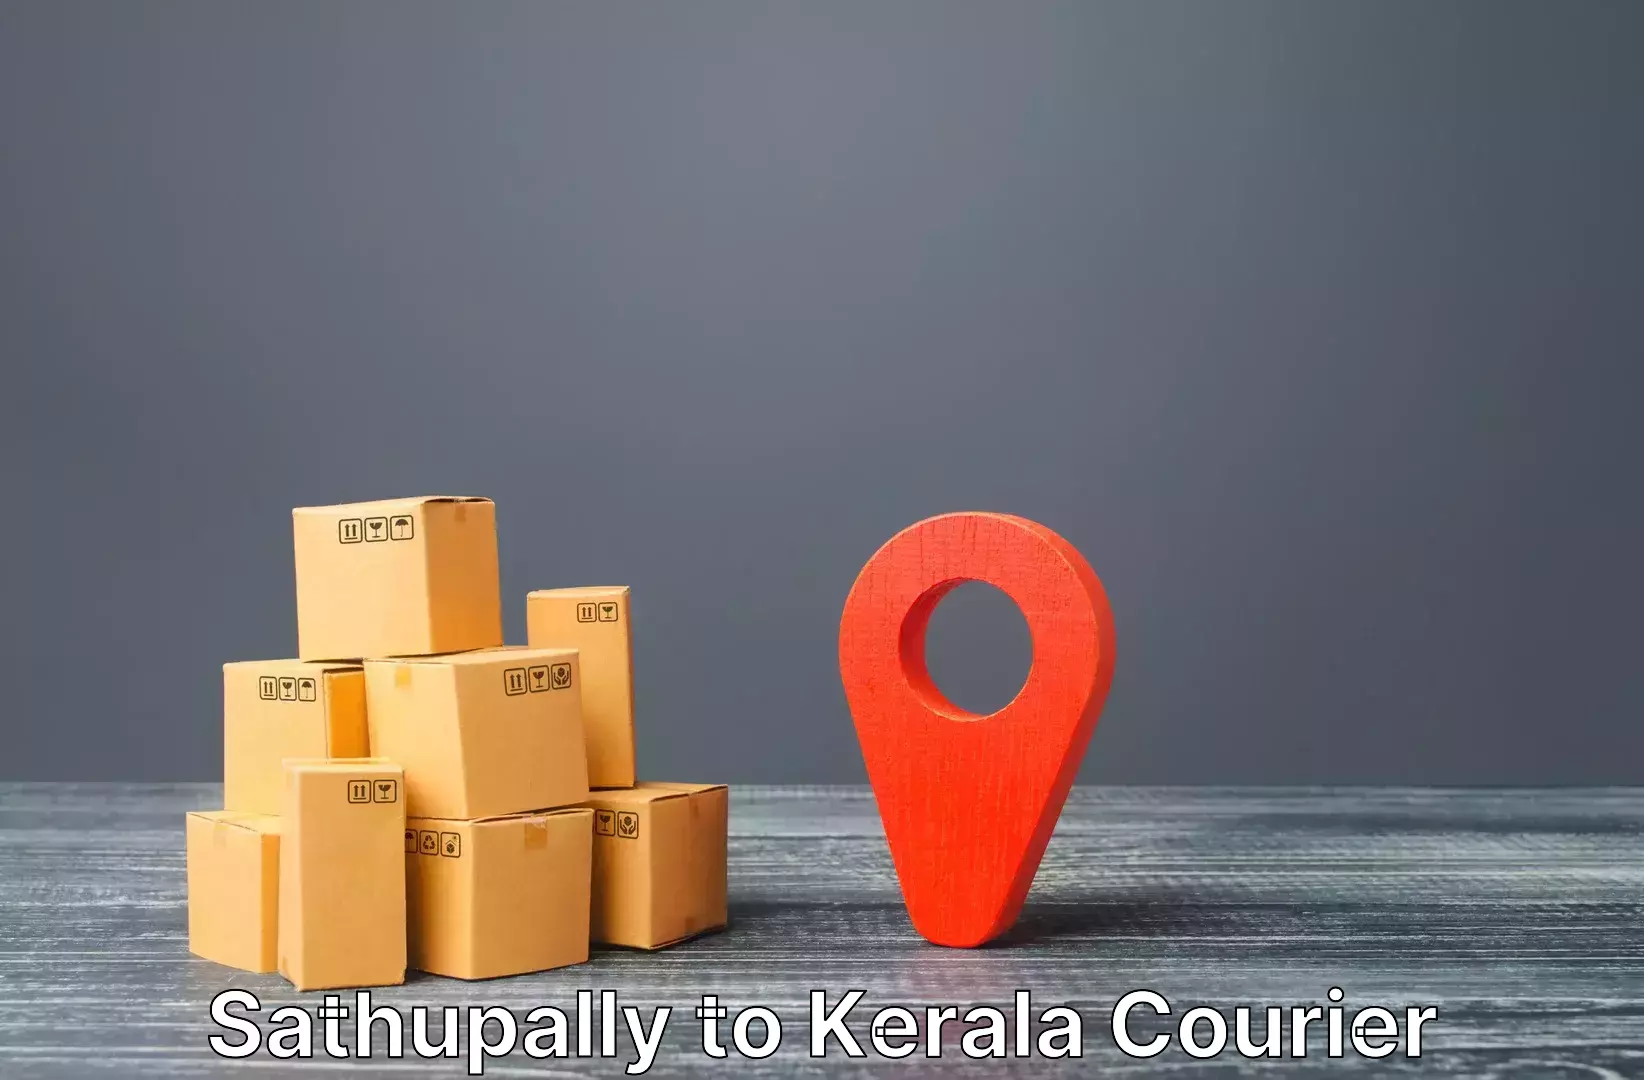 Luggage delivery network Sathupally to Ponekkara